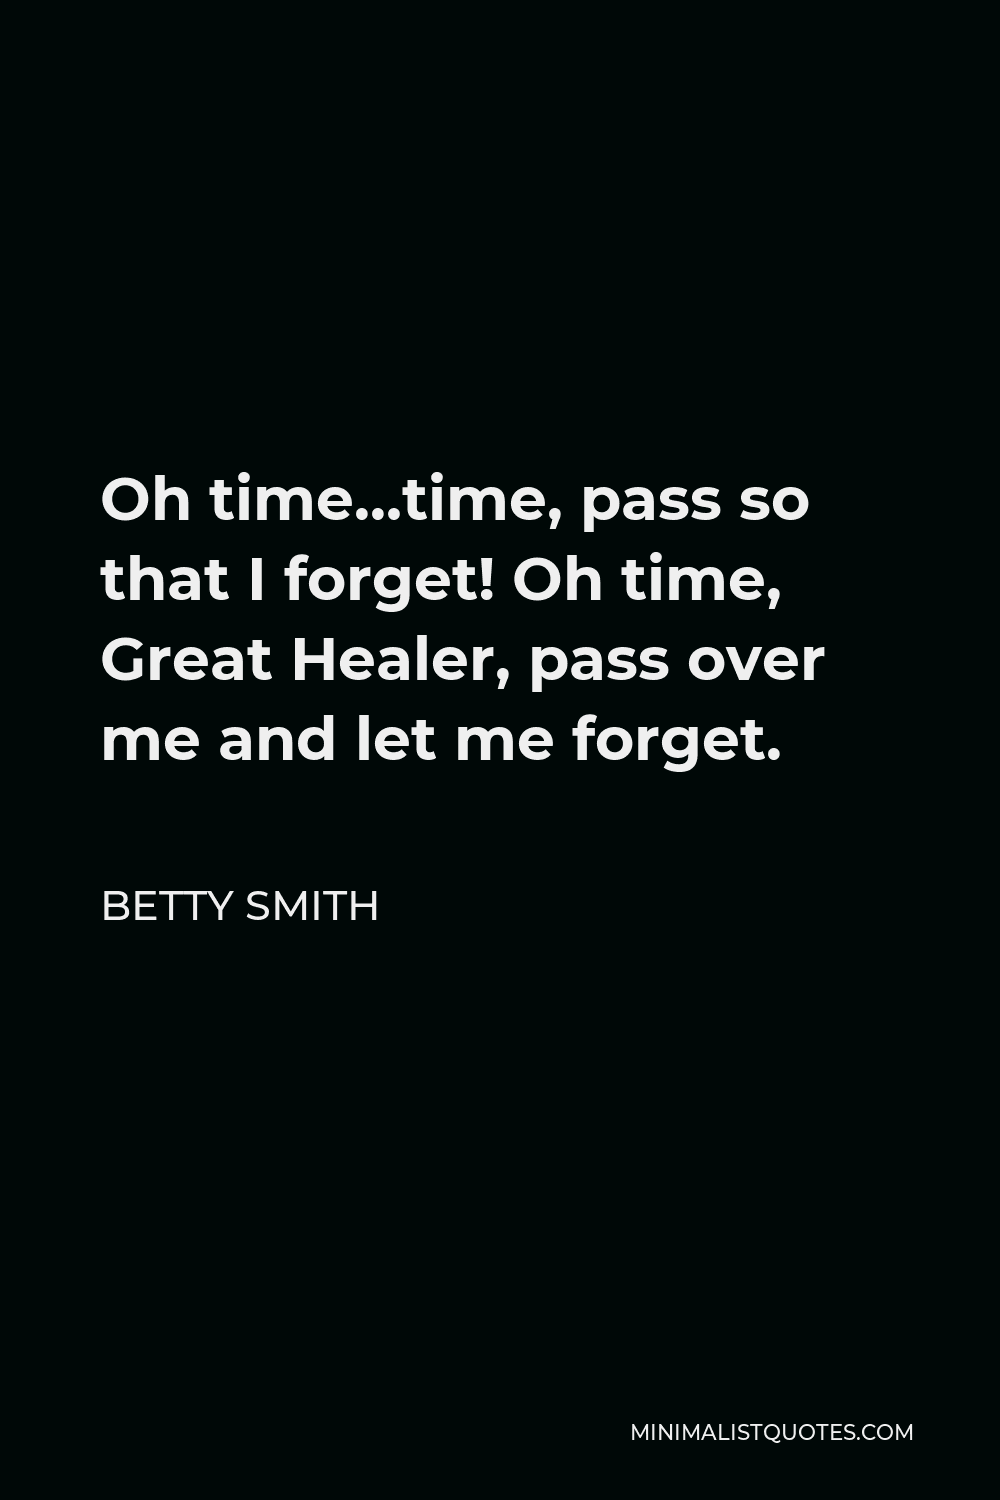 Betty Smith Quote - Oh time…time, pass so that I forget! Oh time, Great Healer, pass over me and let me forget.